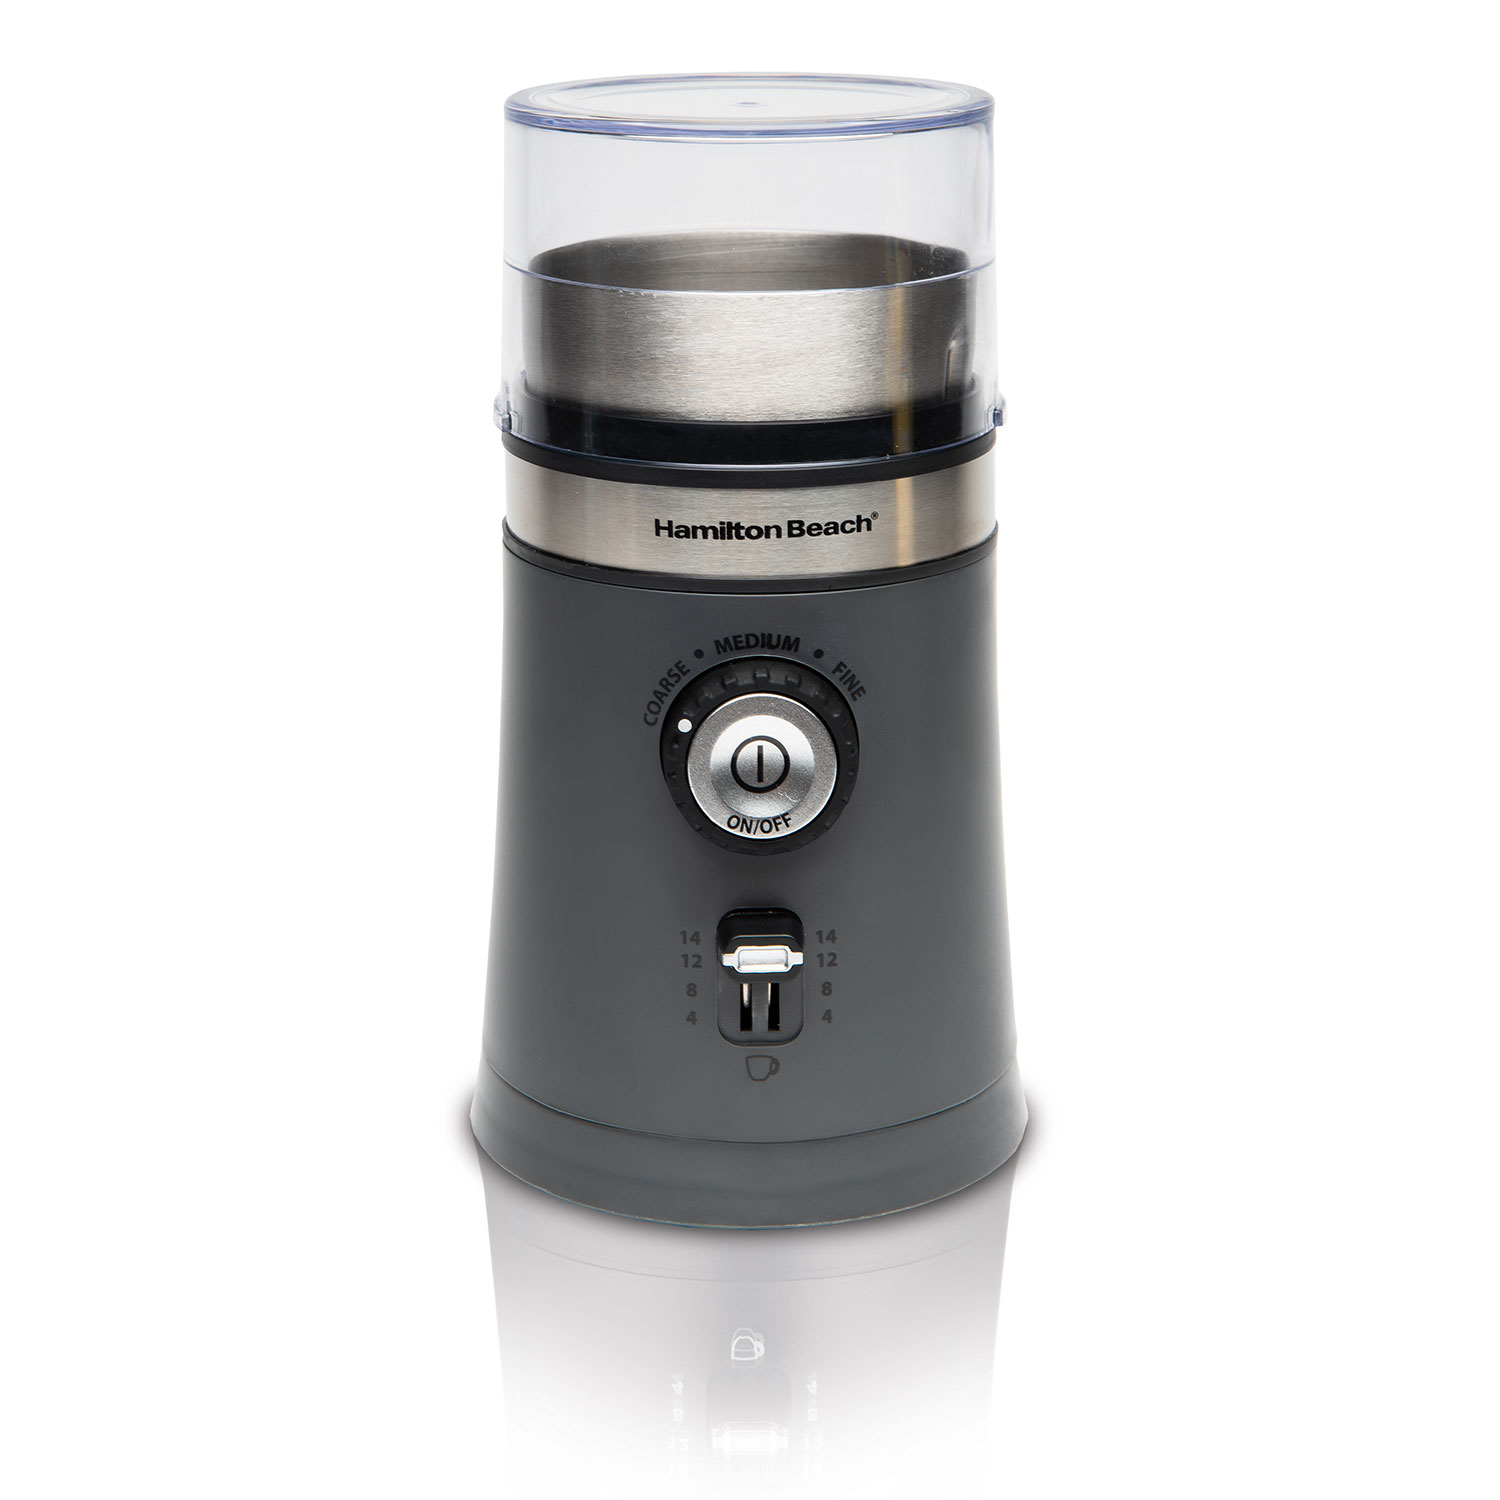 The Custom Grind™ Coffee Grinder features a stainless steel grinding chamber.